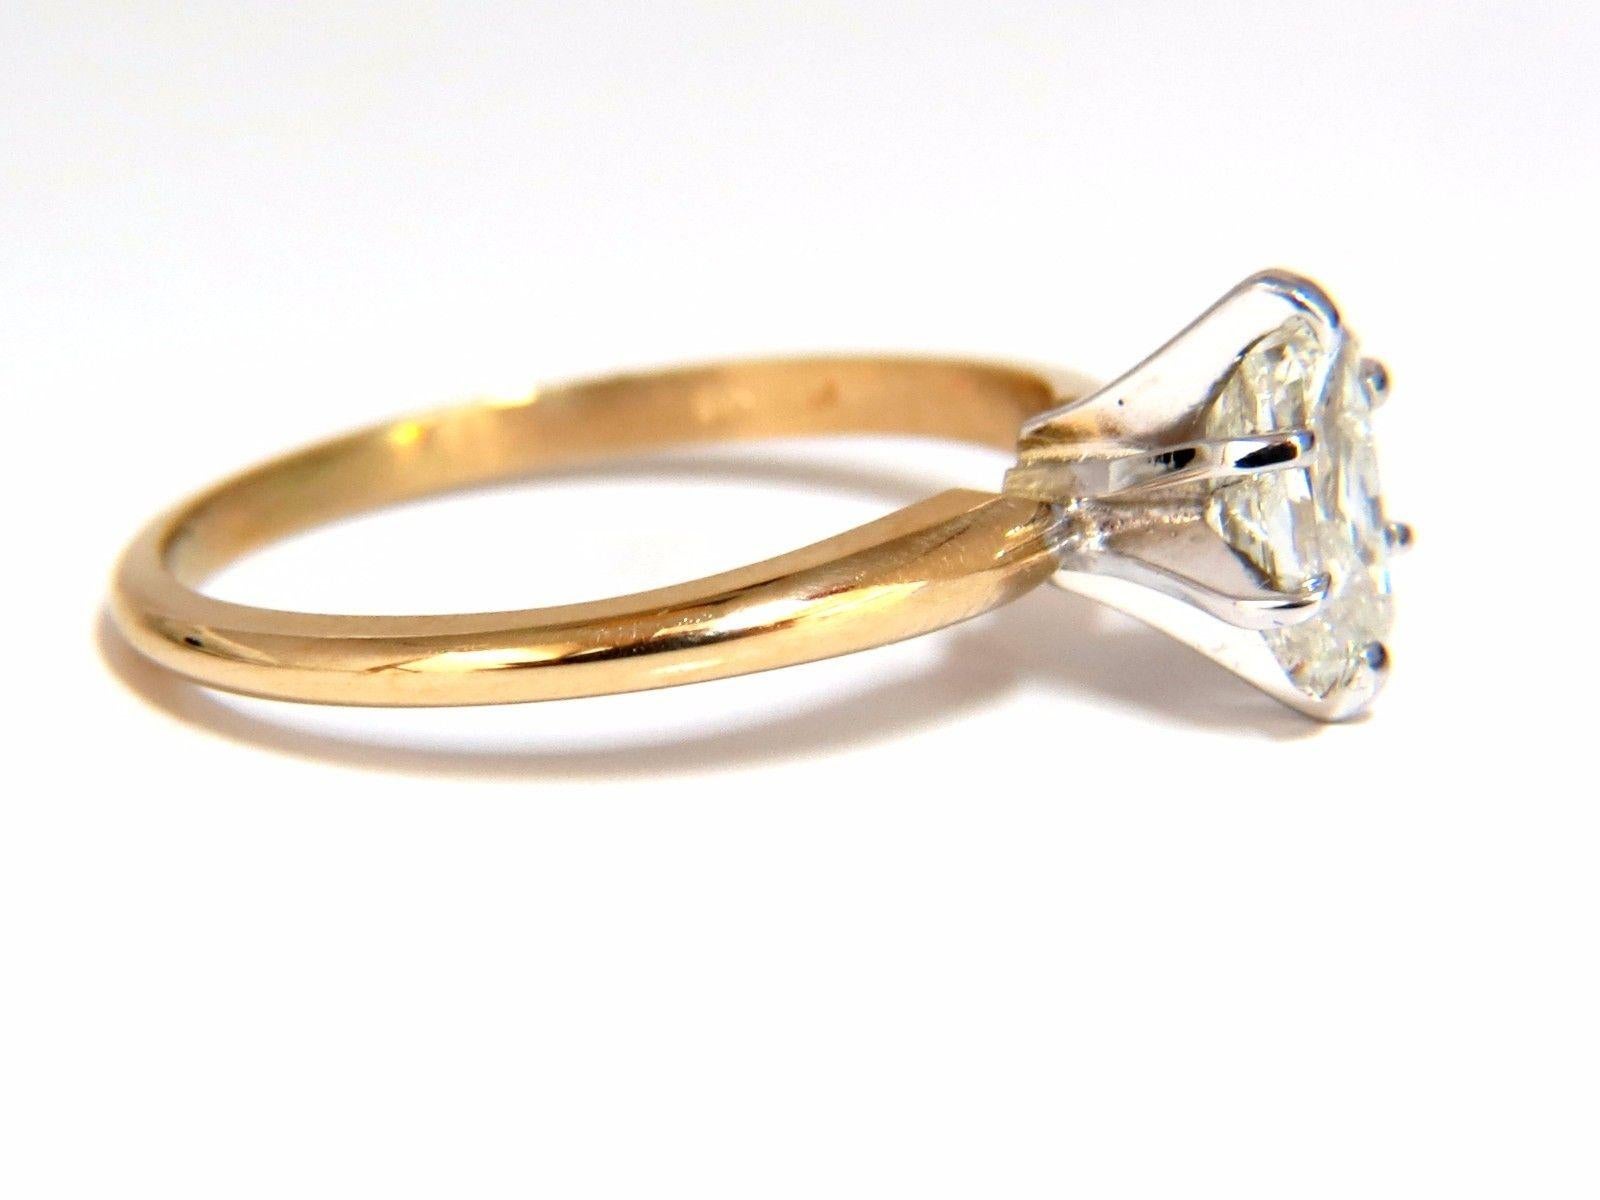 Solitaire Entry.

.75ct. Natural Long radiant cut brilliant diamond

solitaire ring.

Si-2 clarity / K color.

center diamond: 6.6 X 4.1mm

14kt yellow gold.

2.2 Grams

Current ring size: 7.25

May professionally resize, please inquire.